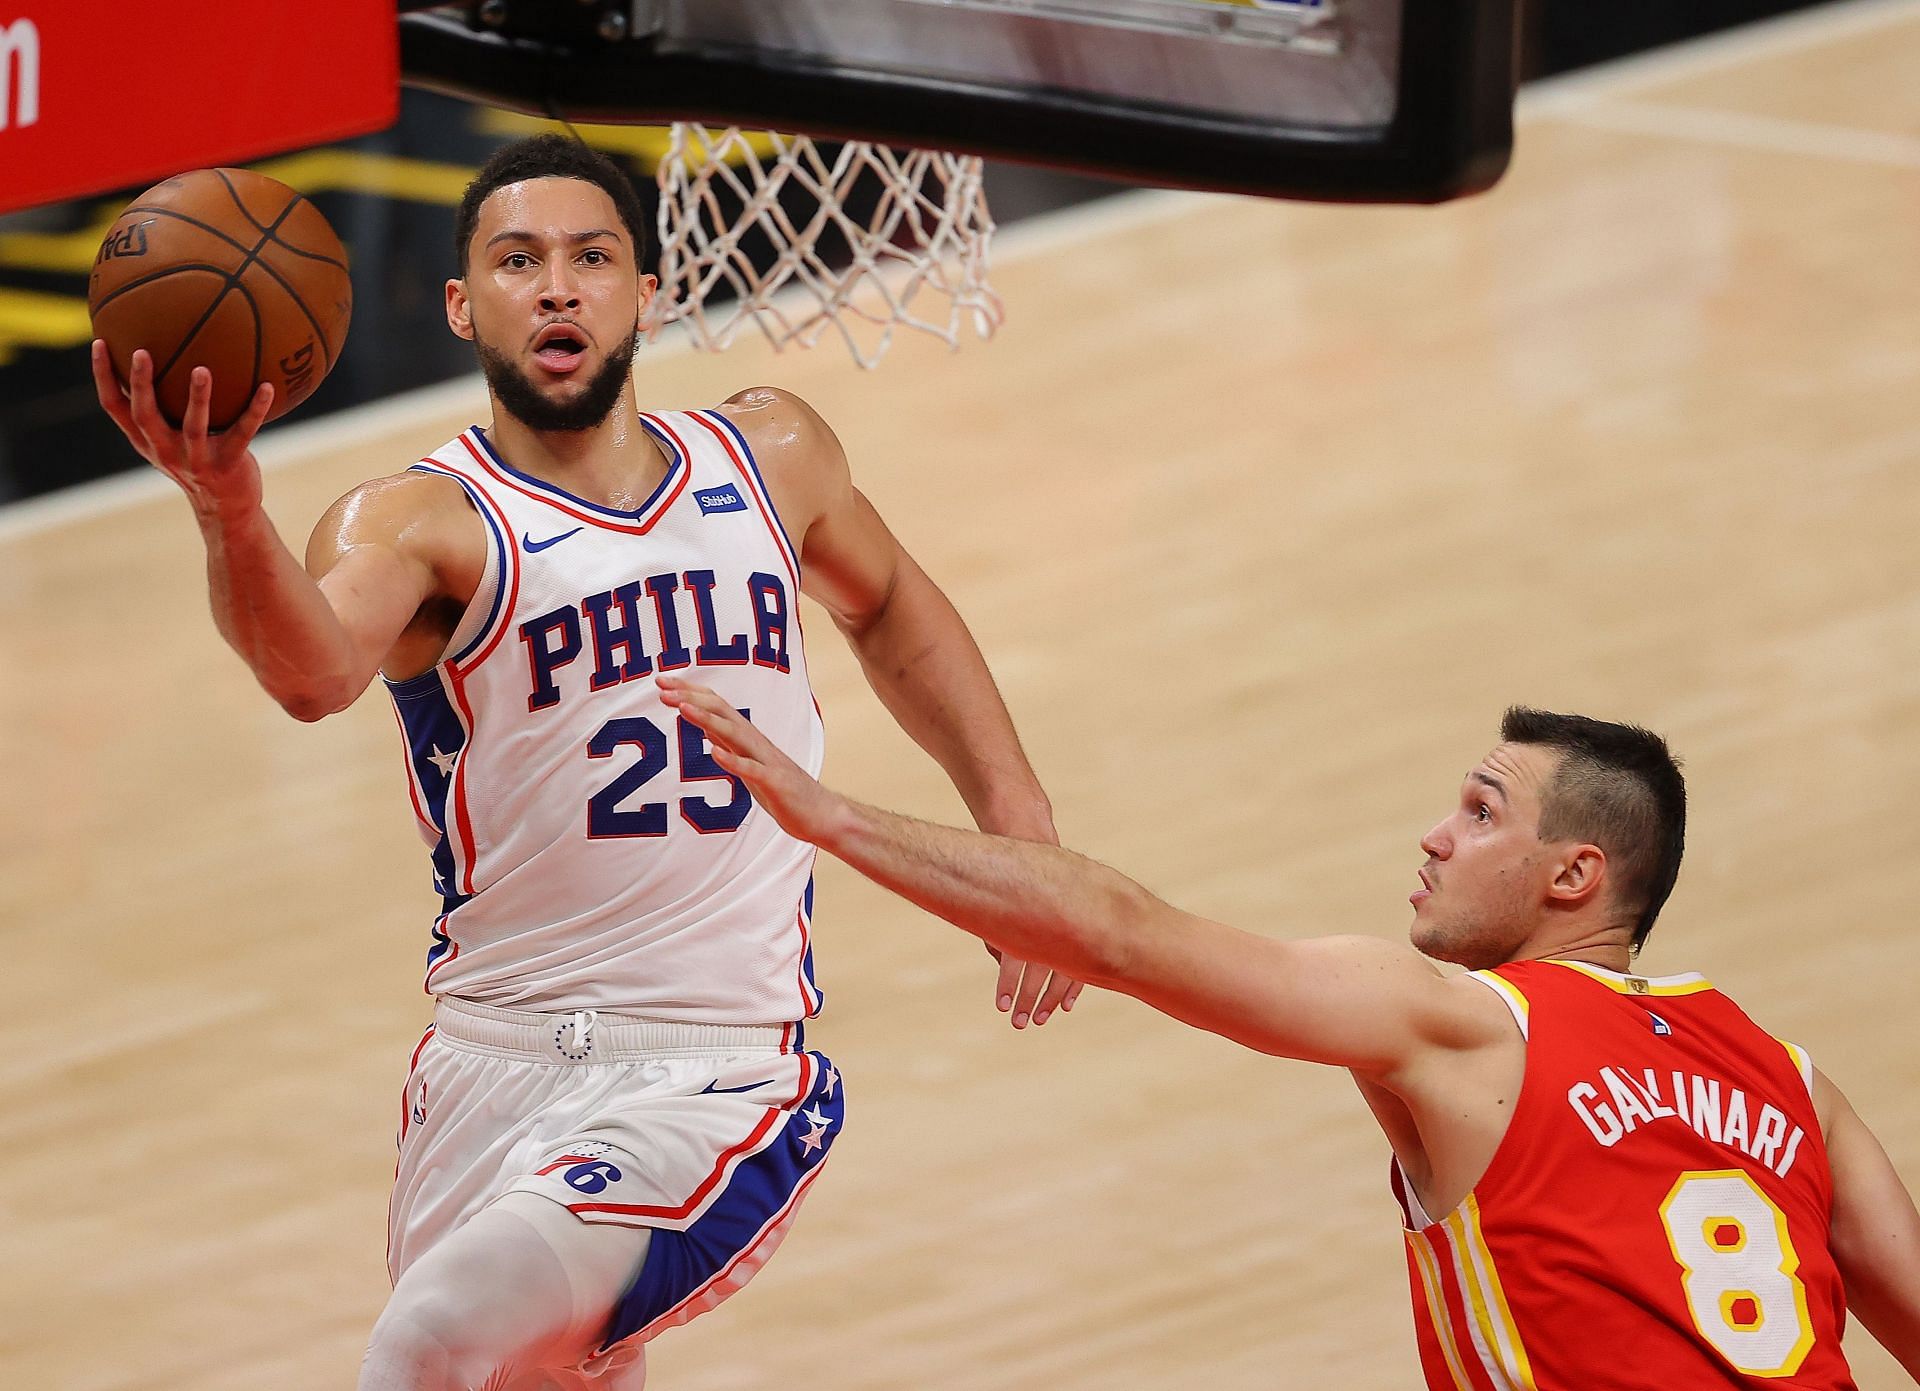 Ben Simmons #25 of the Philadelphia 76ers drives against Danilo Gallinari #8 of the Atlanta Hawks during the first half of game 3 of the Eastern Conference Semifinals at State Farm Arena on June 11, 2021 in Atlanta, Georgia.